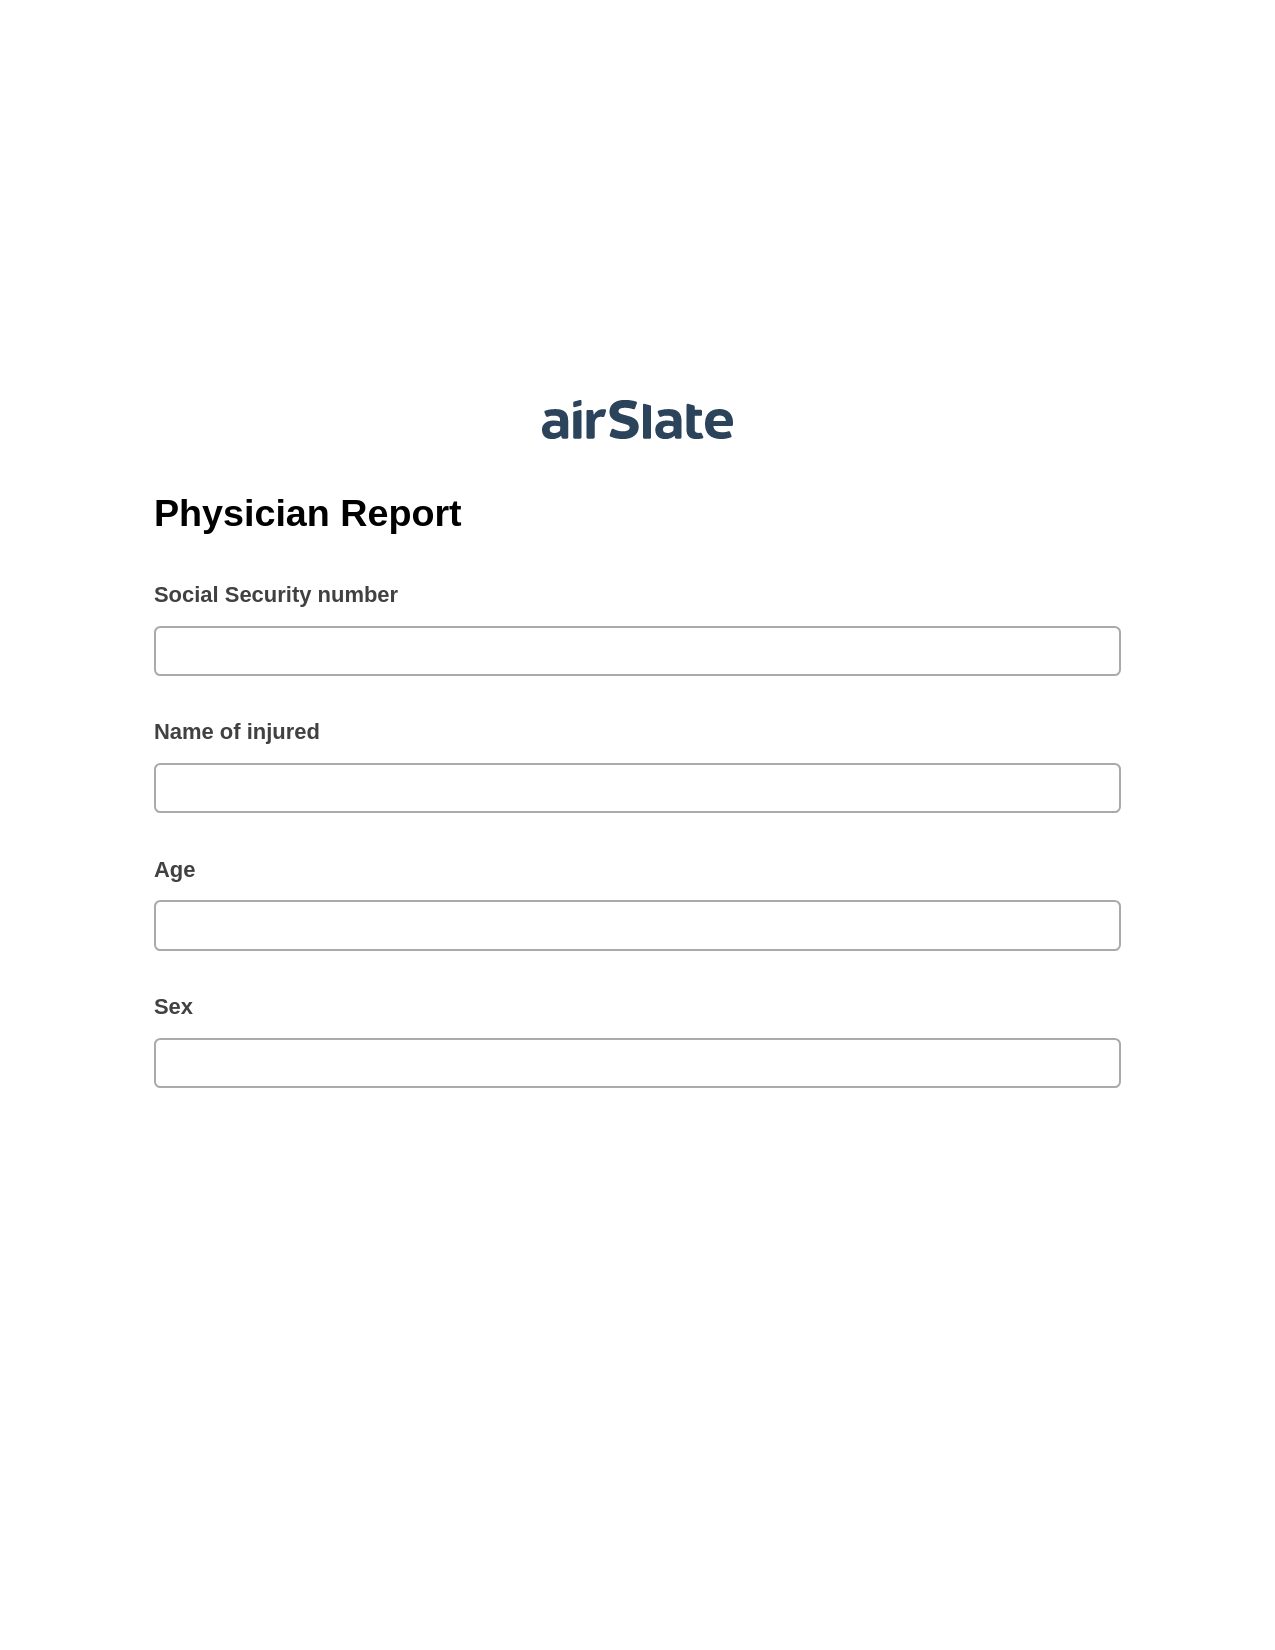 Multirole Physician Report Pre-fill Dropdowns from CSV file Bot, Create MS Dynamics 365 Records Bot, Post-finish Document Bot